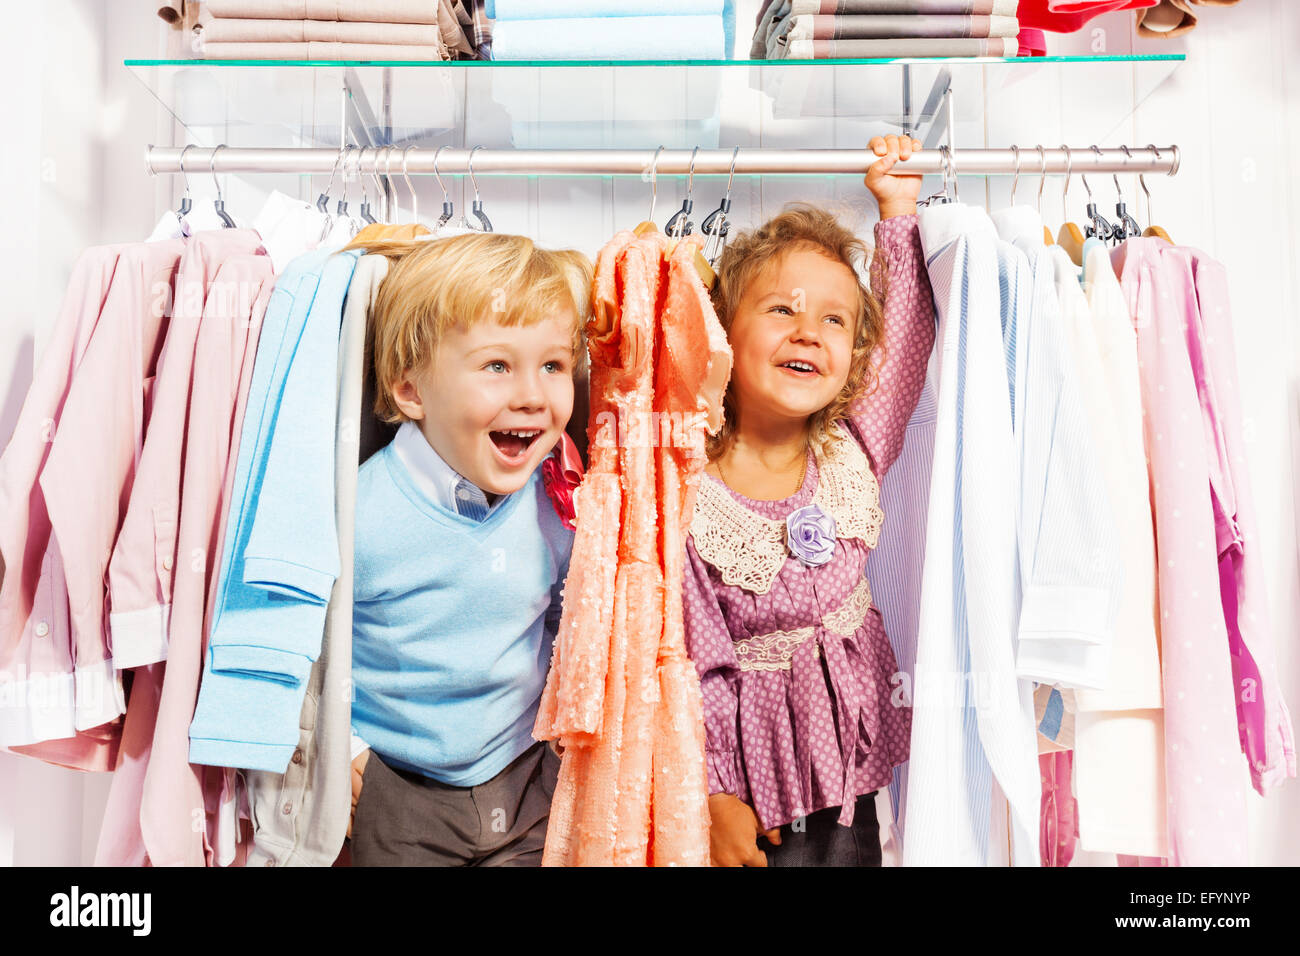 Excited boy and girl play hide-and-seek in store Stock Photo - Alamy